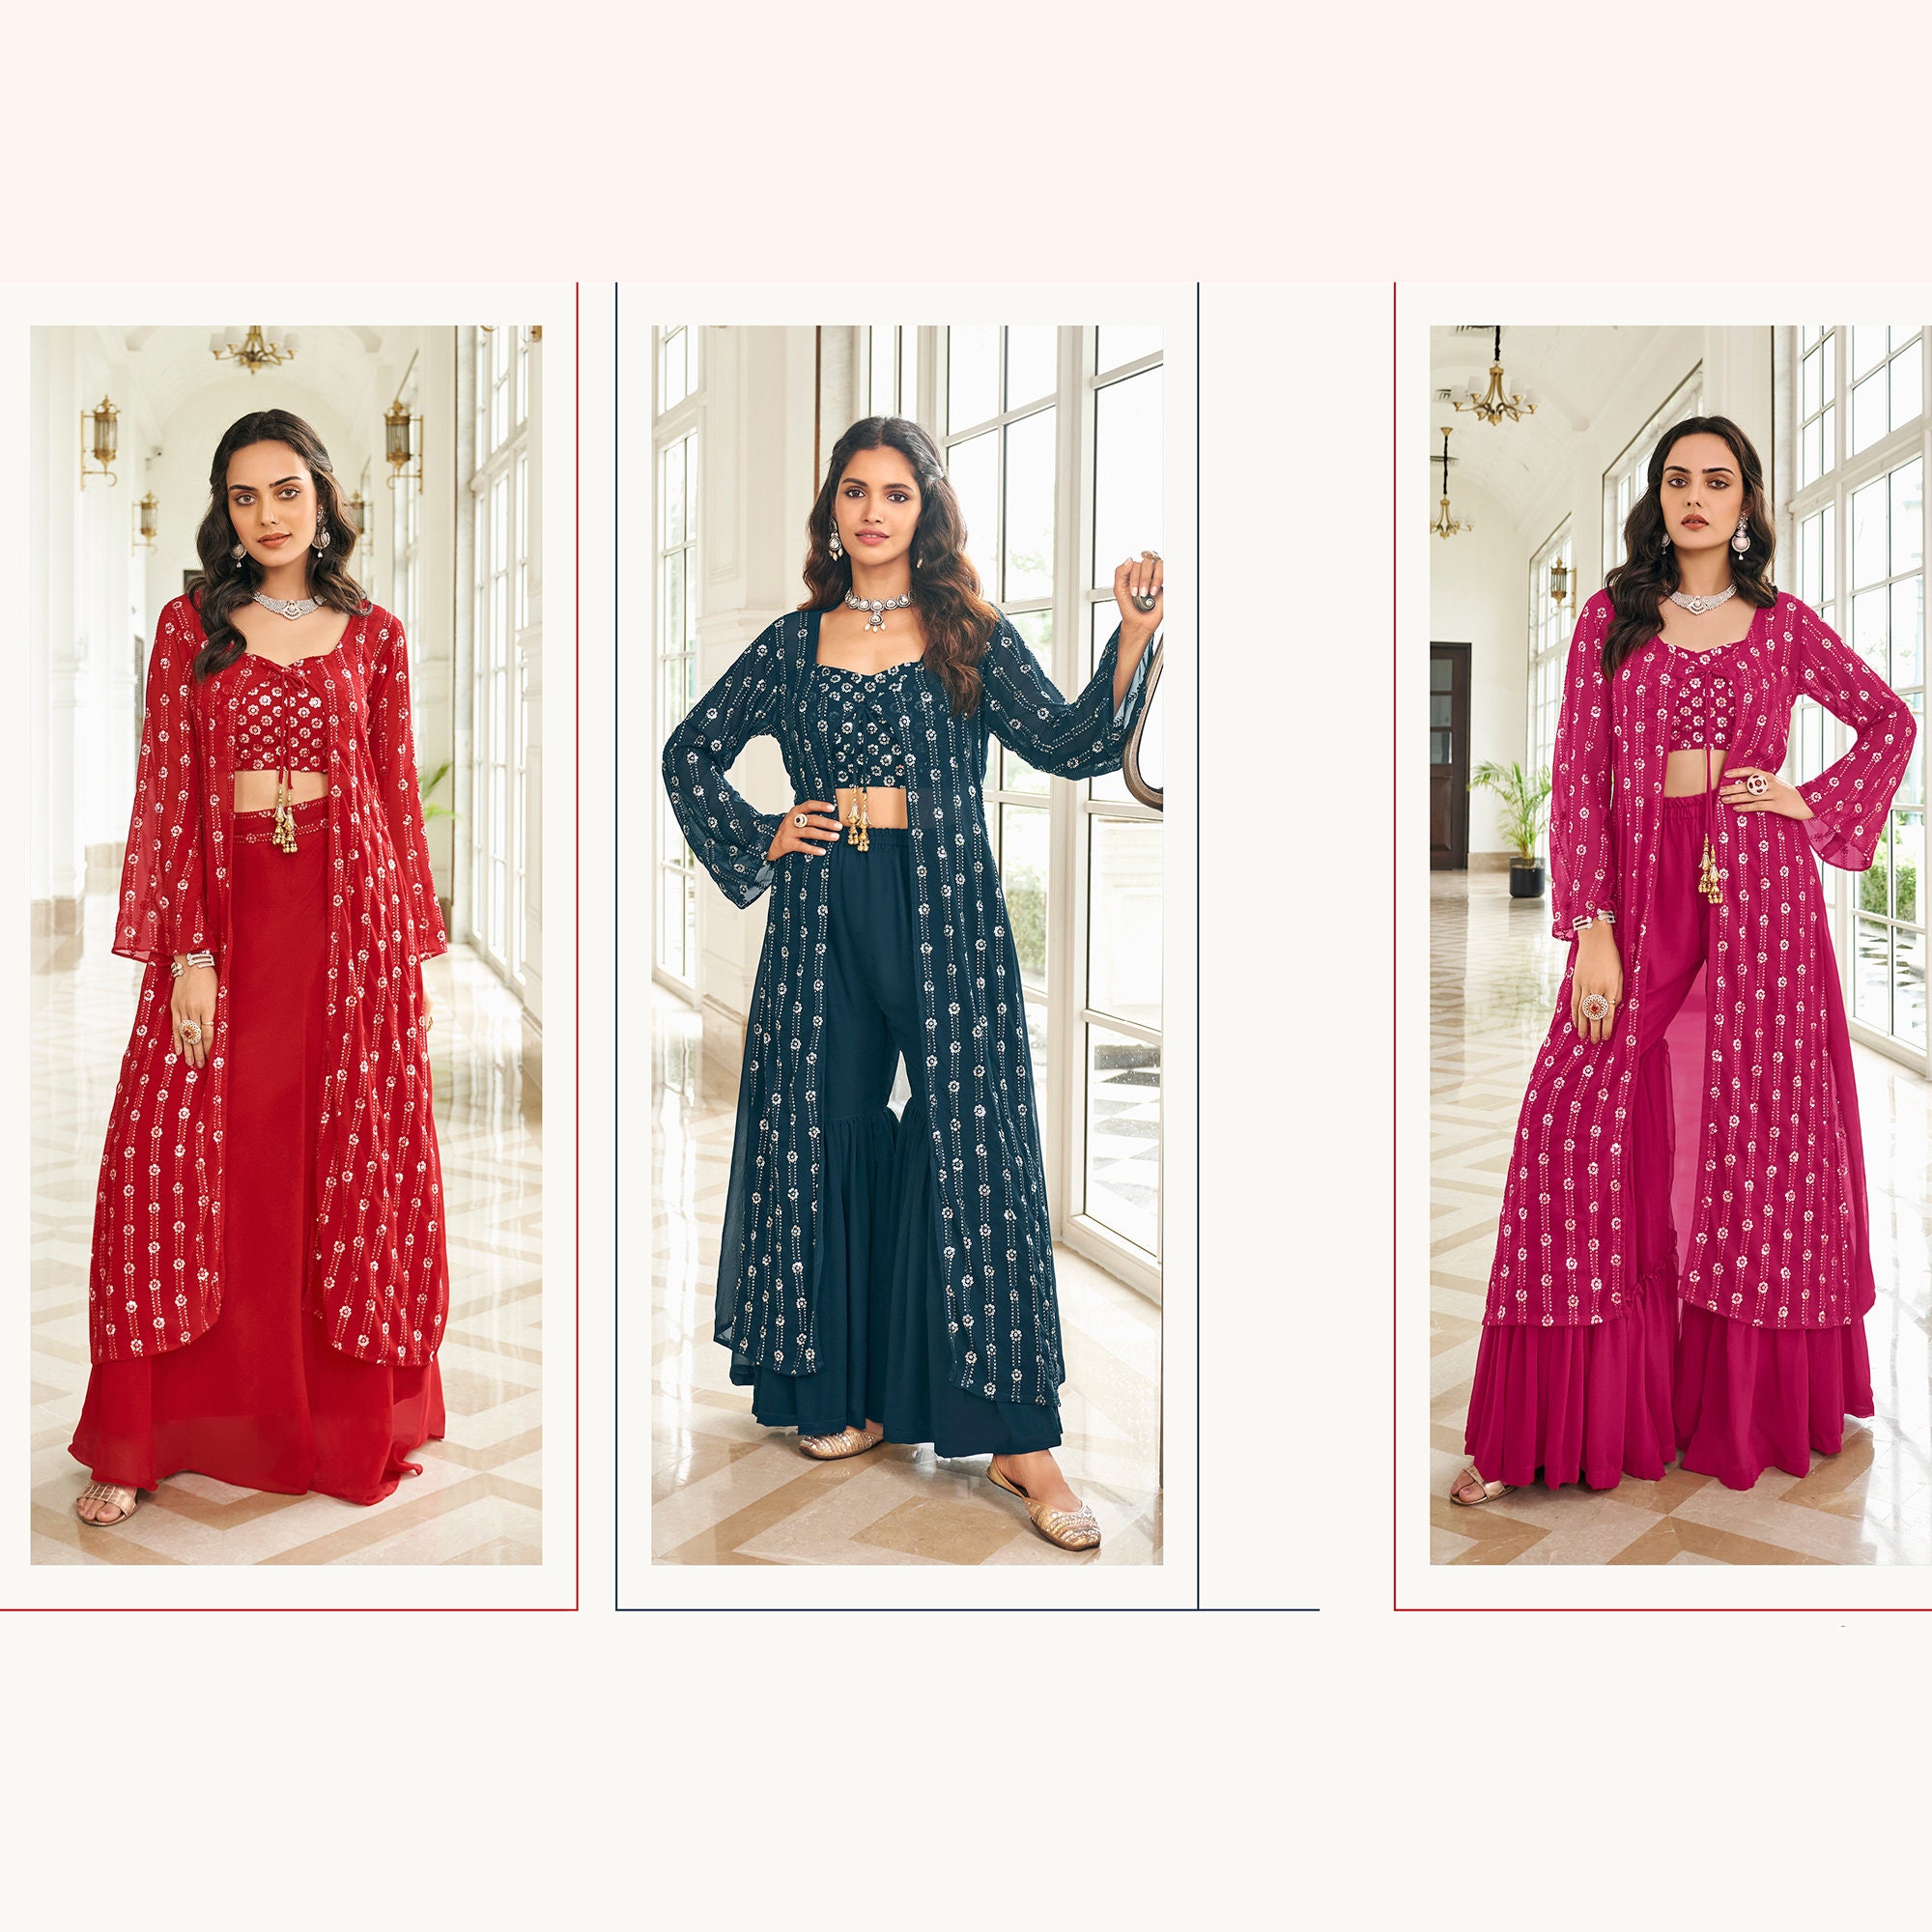 Agha noor Maria B Anarkali Suit Gown Reception Wear Shalwar Kmaeez Shalwar  Suit For Woman's (Choice 1) : Amazon.co.uk: Fashion